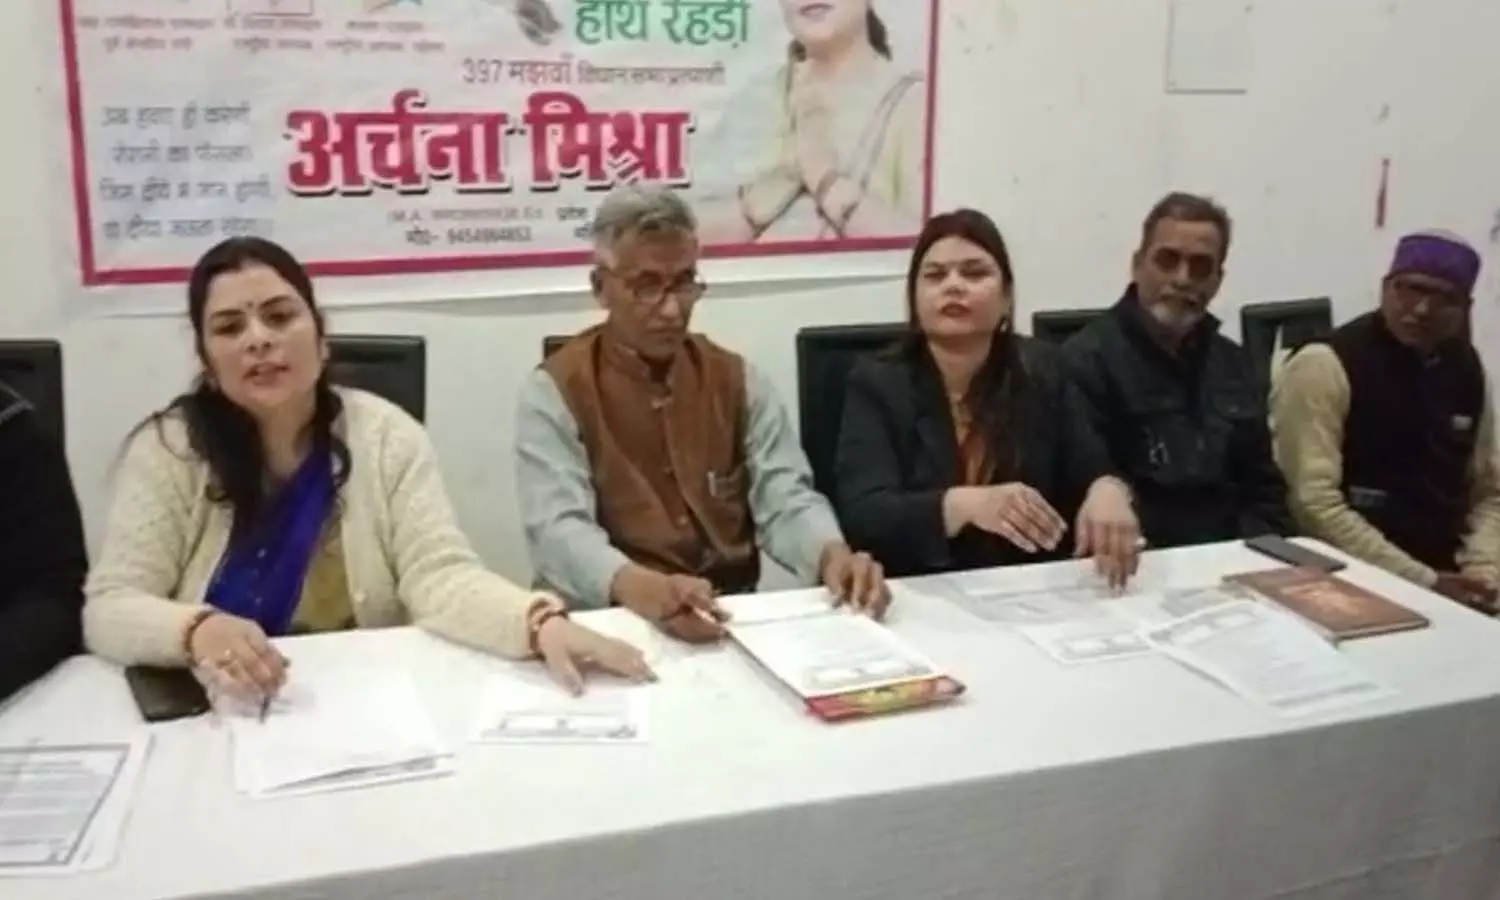 UP Election 2022: Lok Janshakti Party announced, youth will be given unemployment allowance of two thousand rupees per month